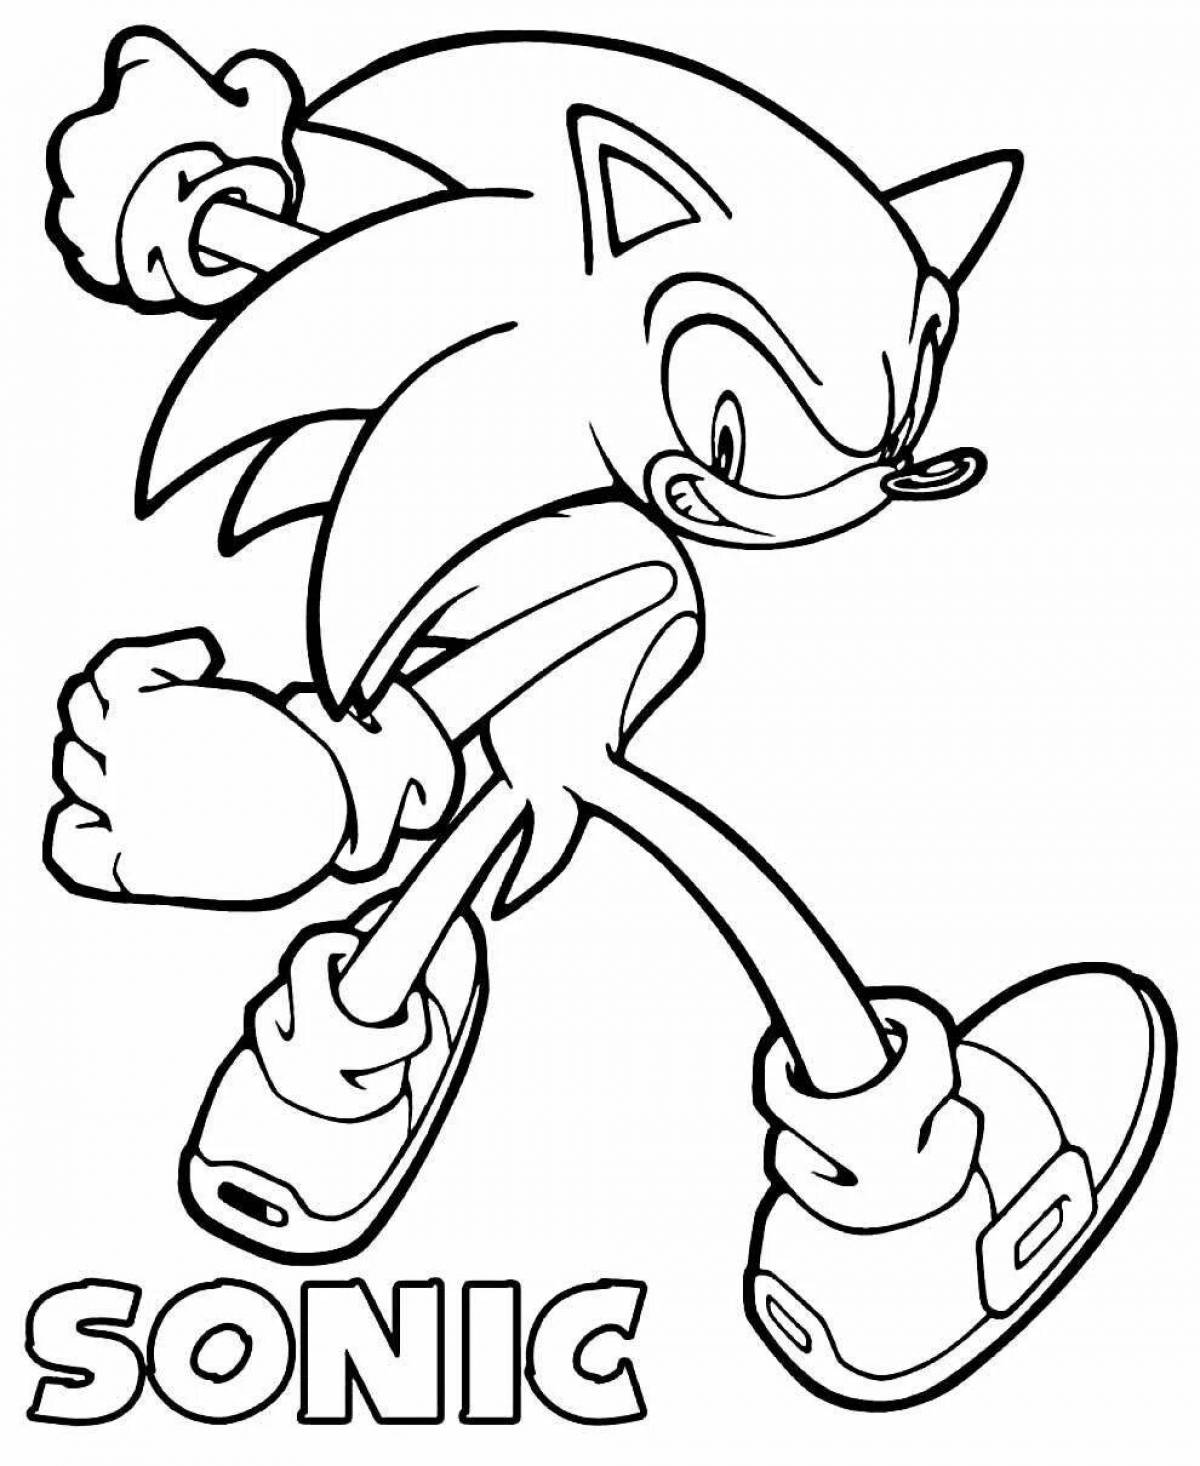 Sublime darkspine sonic coloring page